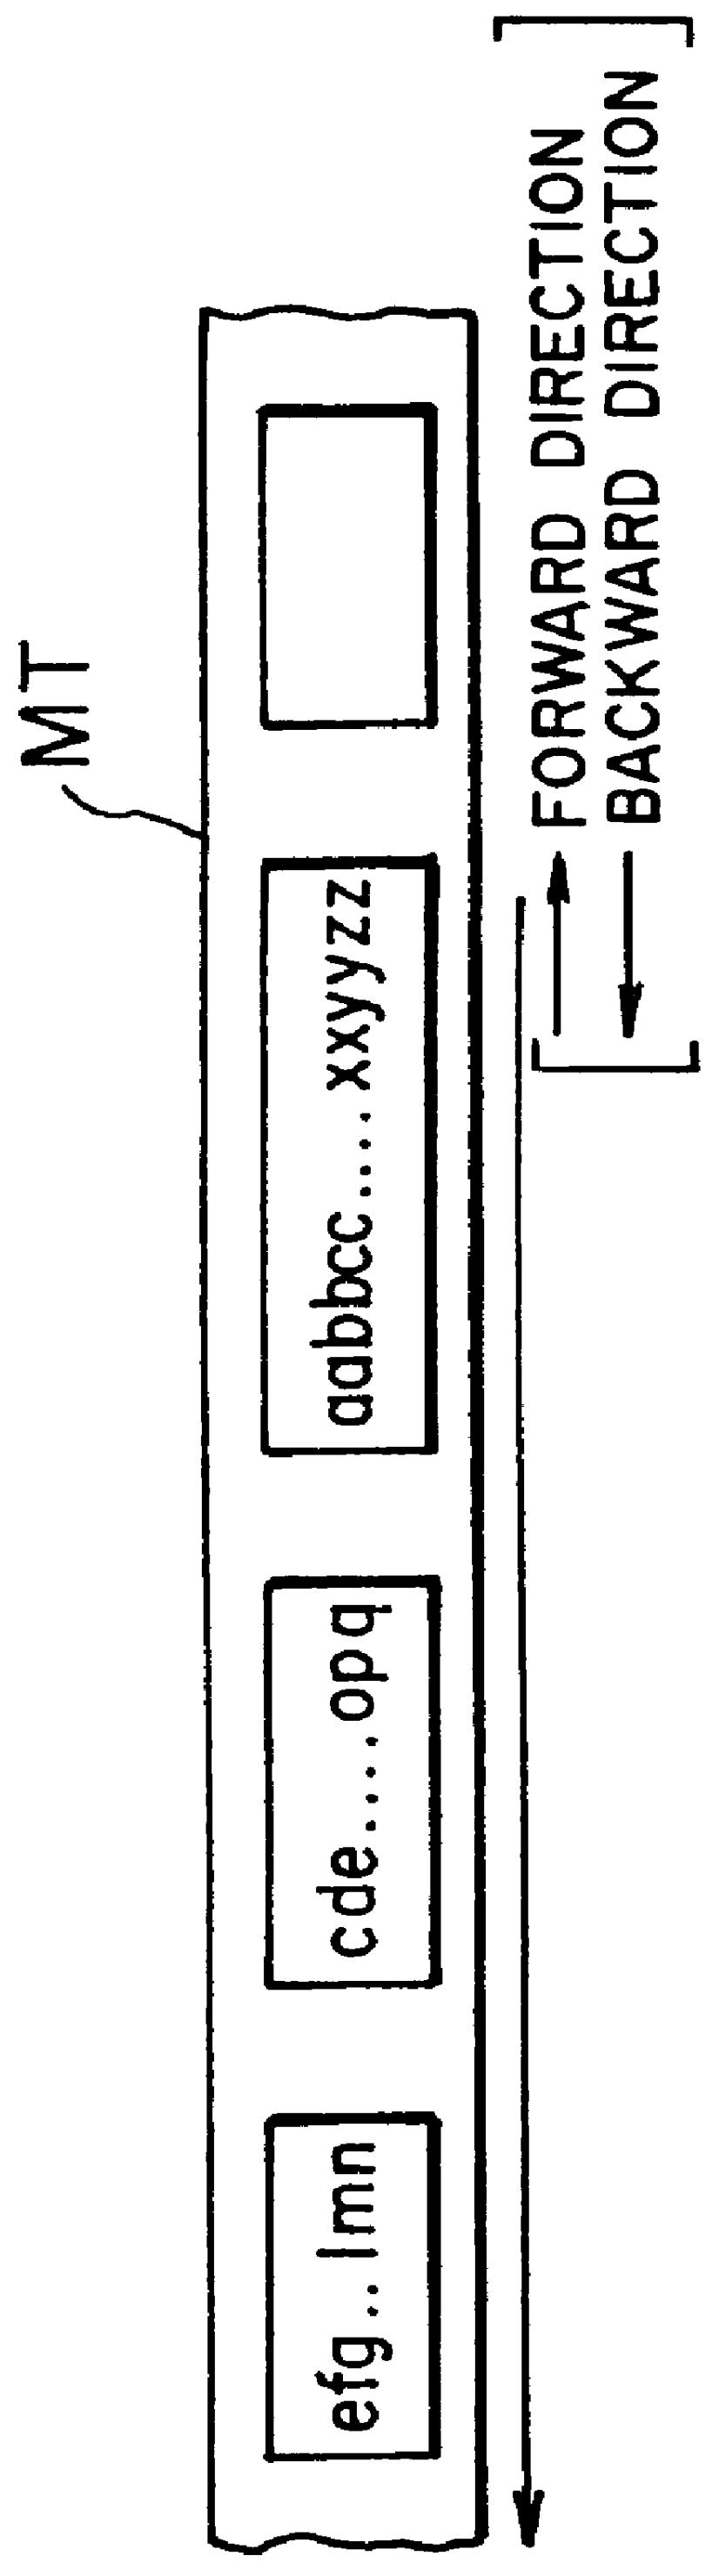 Method of controlling magnetic tape unit